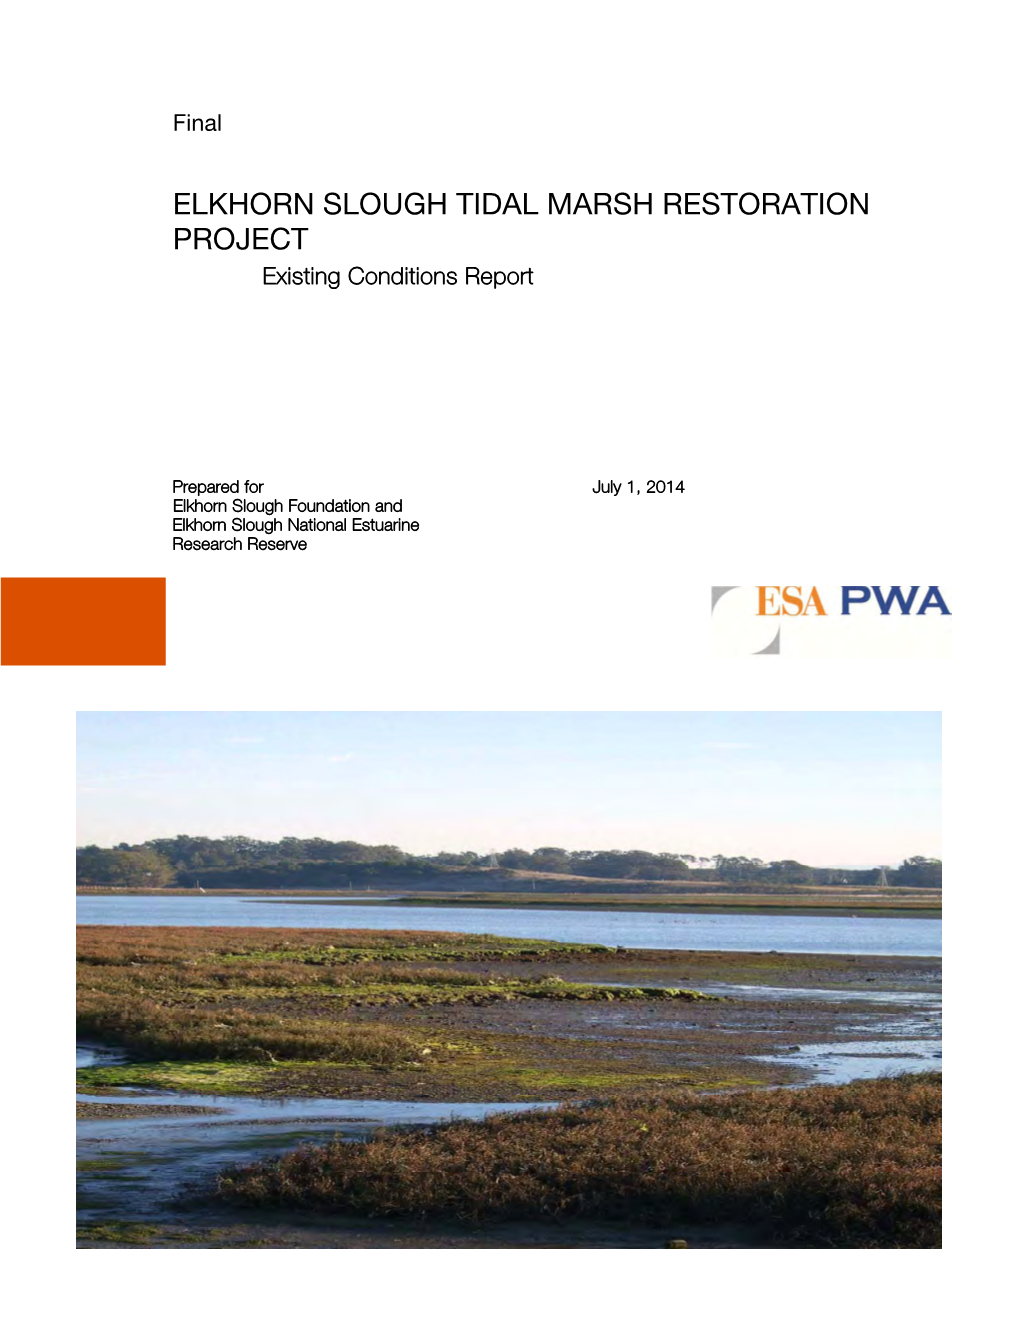 ELKHORN SLOUGH TIDAL MARSH RESTORATION PROJECT Existing Conditions Report